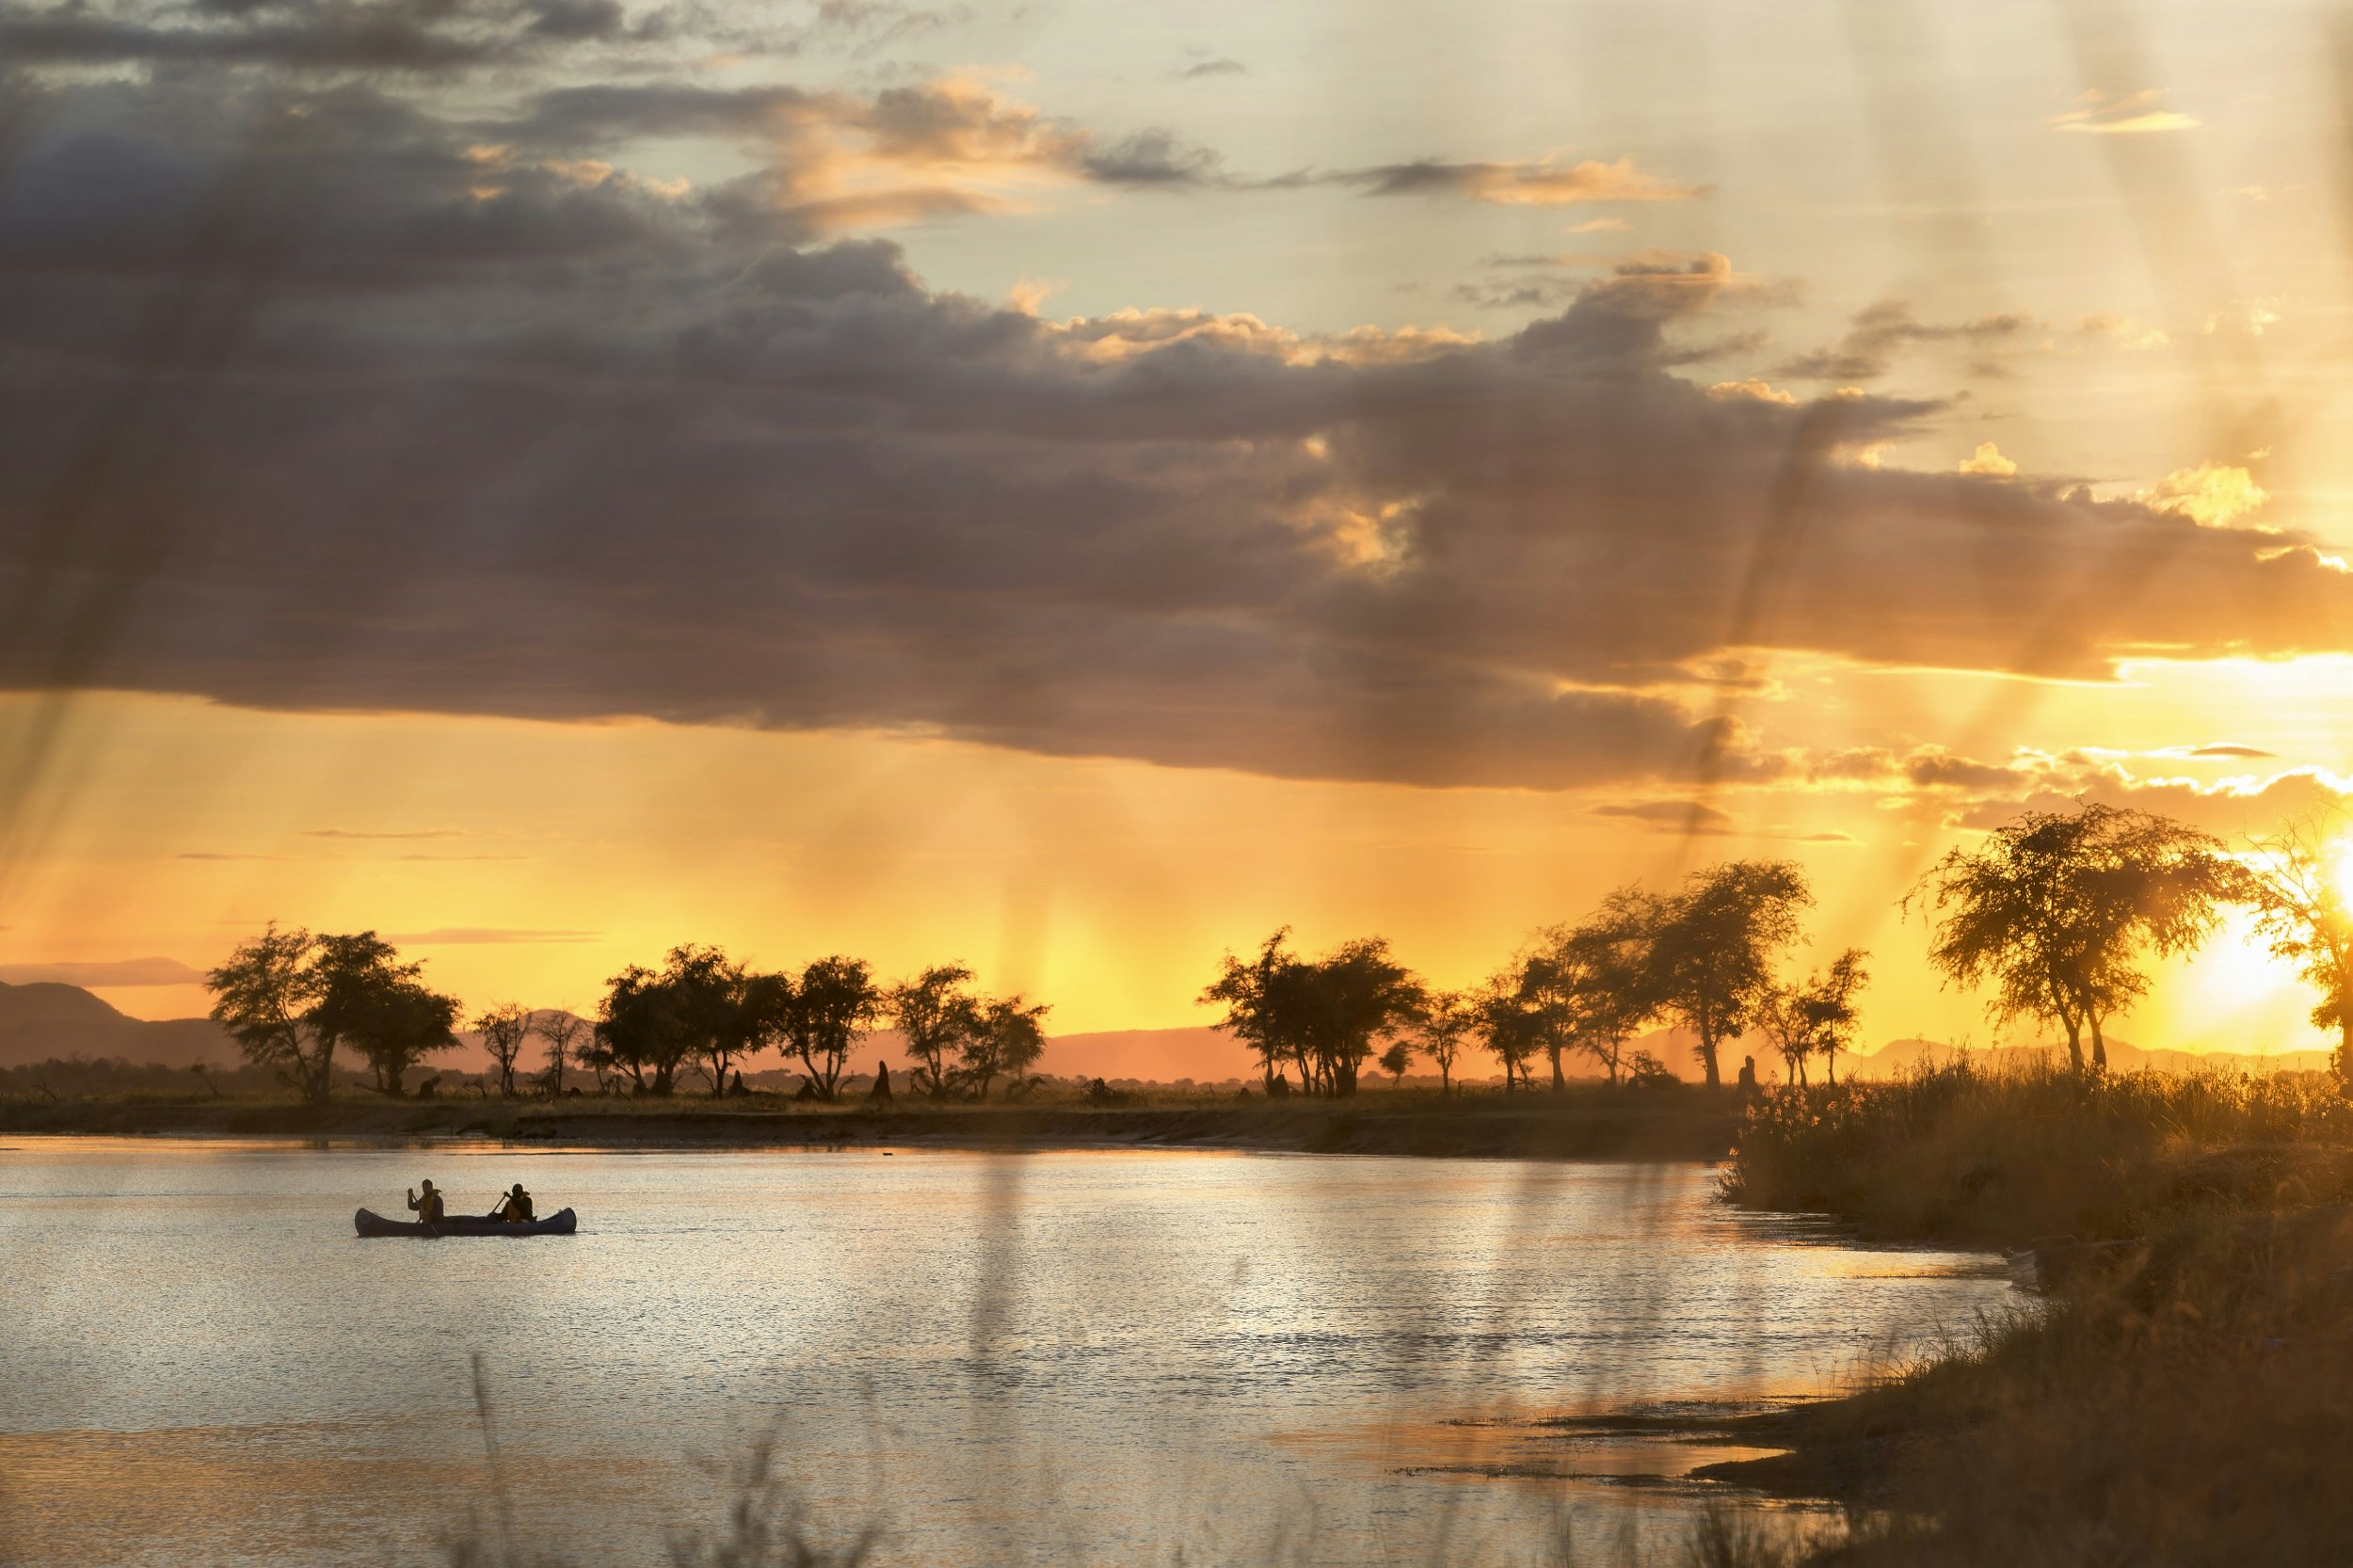 A canoe sits in a curve of the Zambezi River, with acacia trees silhouetted along its shore; the sky is golden, with dark clouds cutting across it.